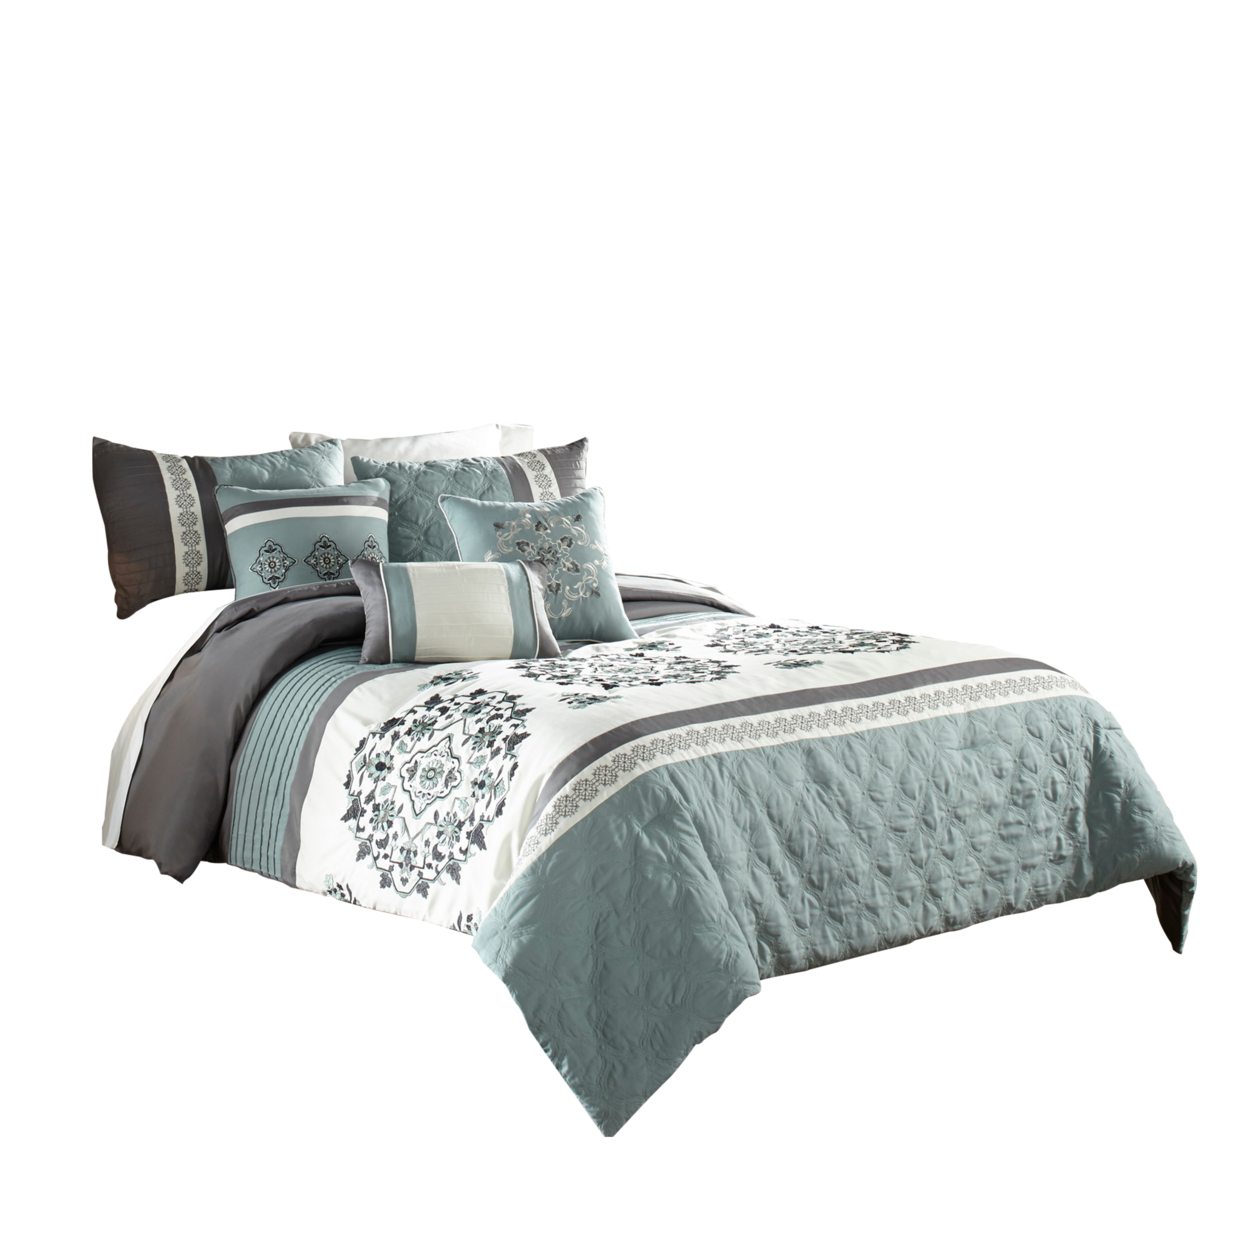 7 Piece King Polyester Comforter Set With Floral Details, Blue And Gray- Saltoro Sherpi